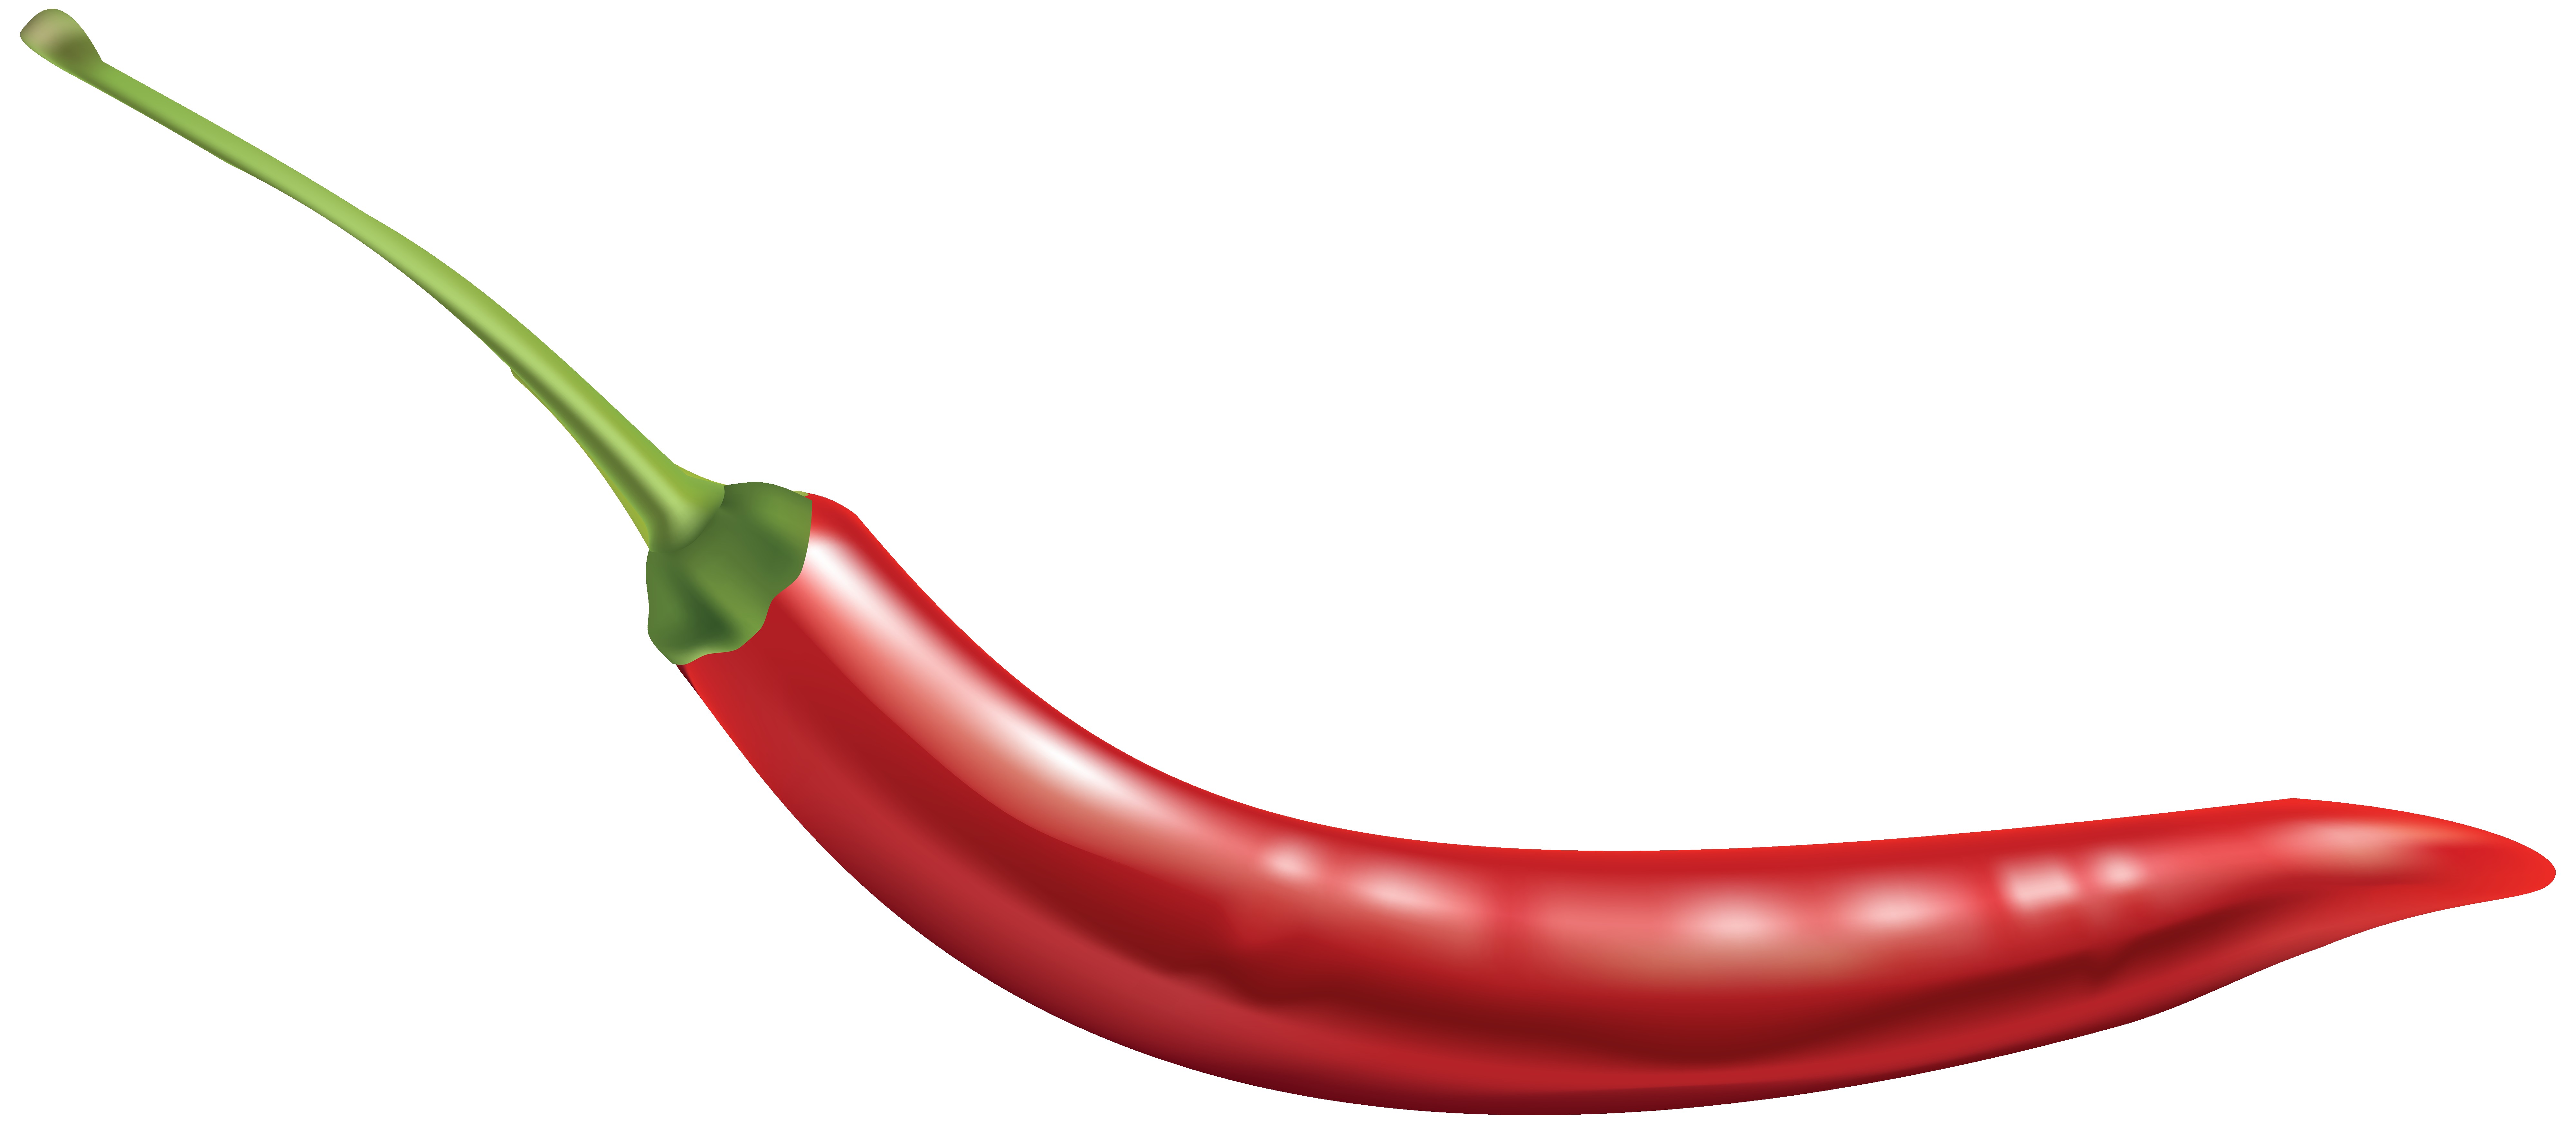 Chili Pepper Clipart at GetDrawings.com.